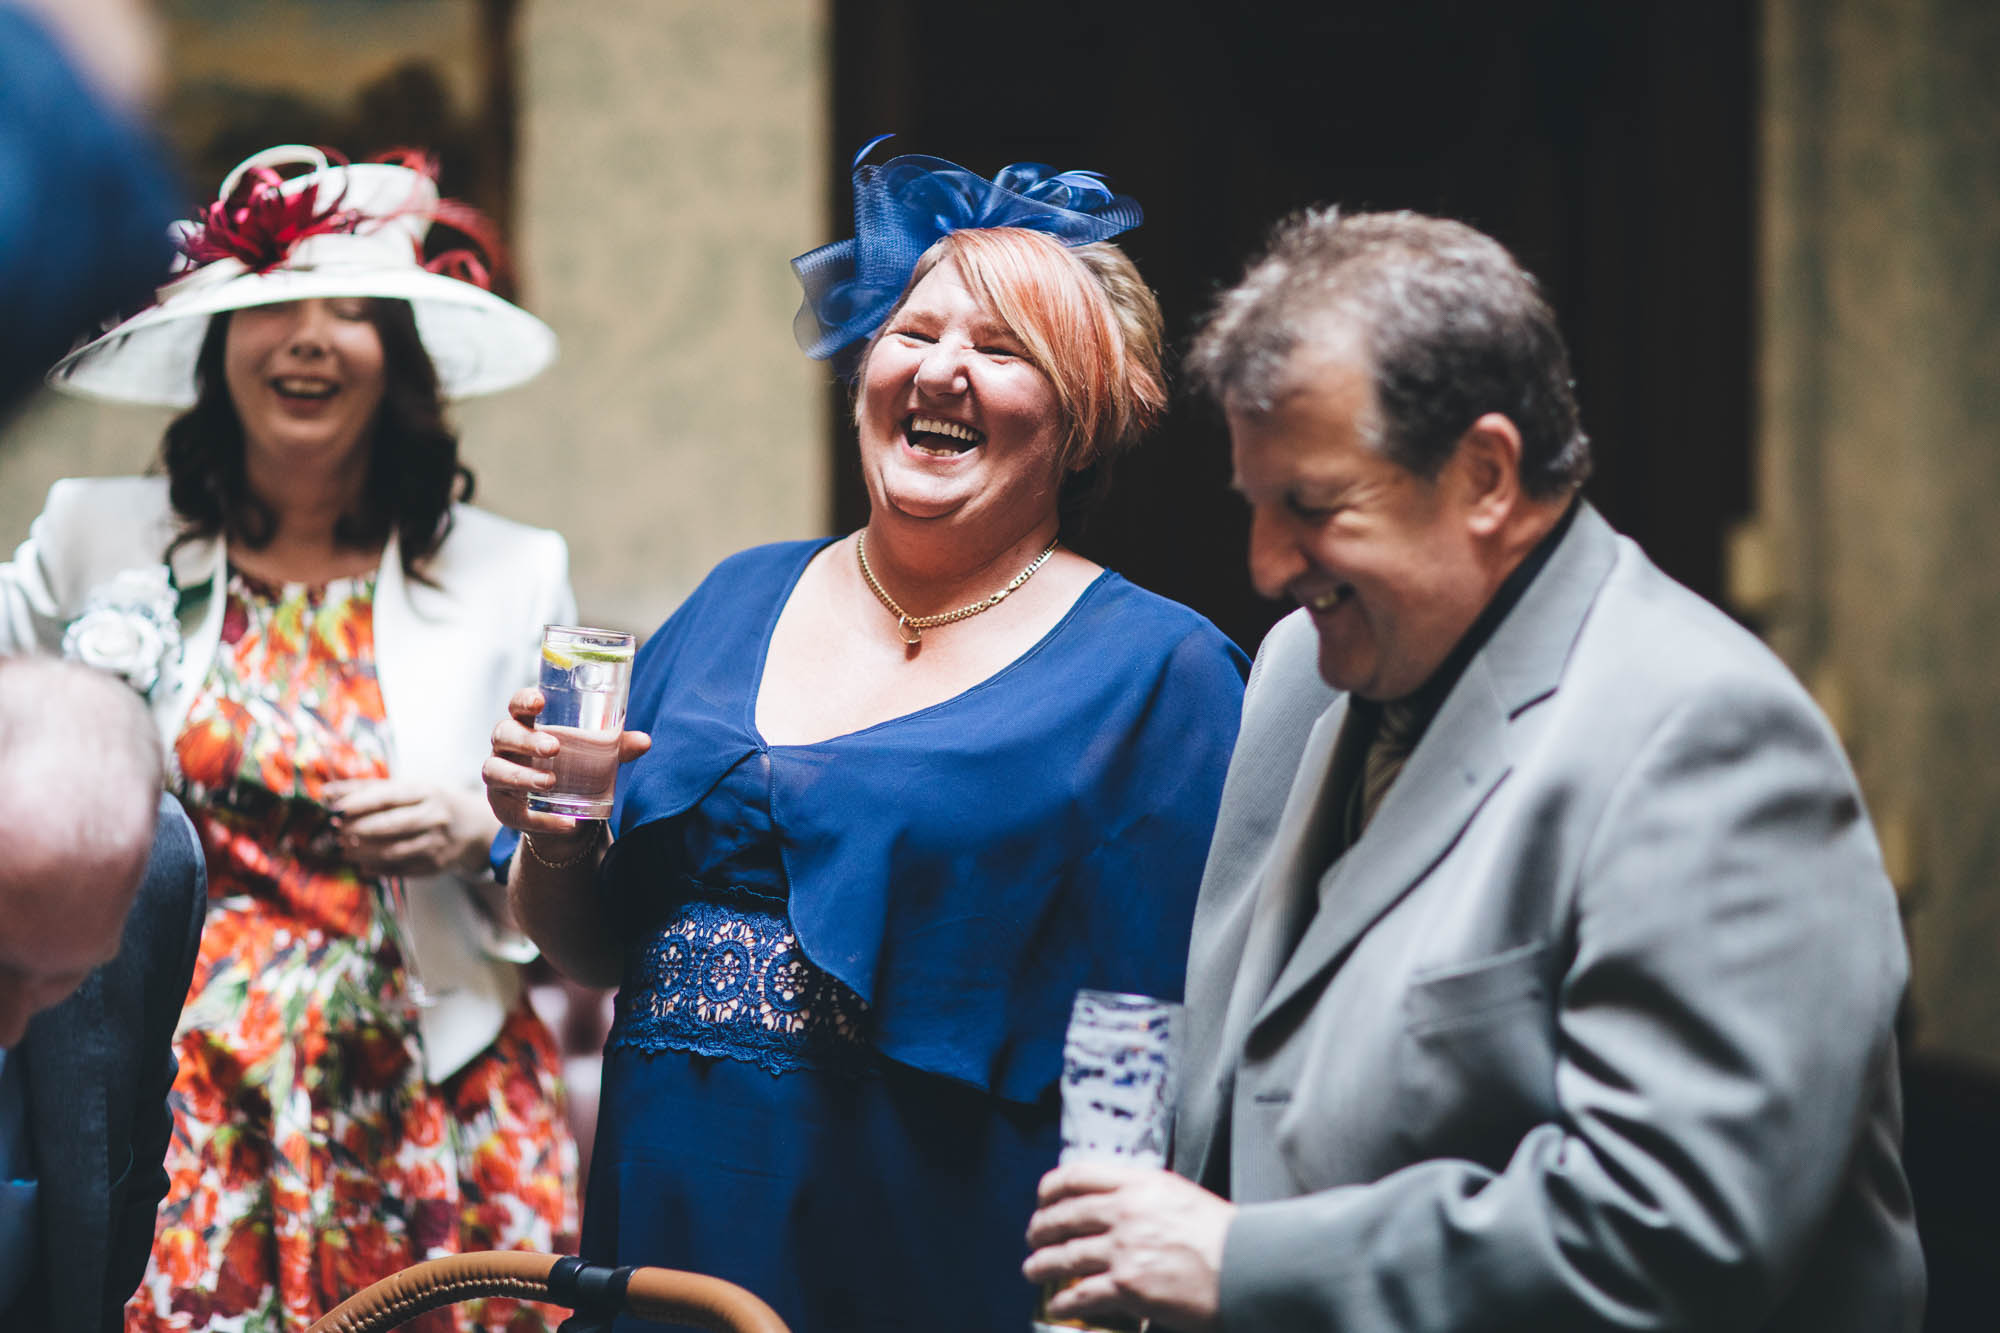 Wedding Guests share a joke while they have a drink at wedding reception